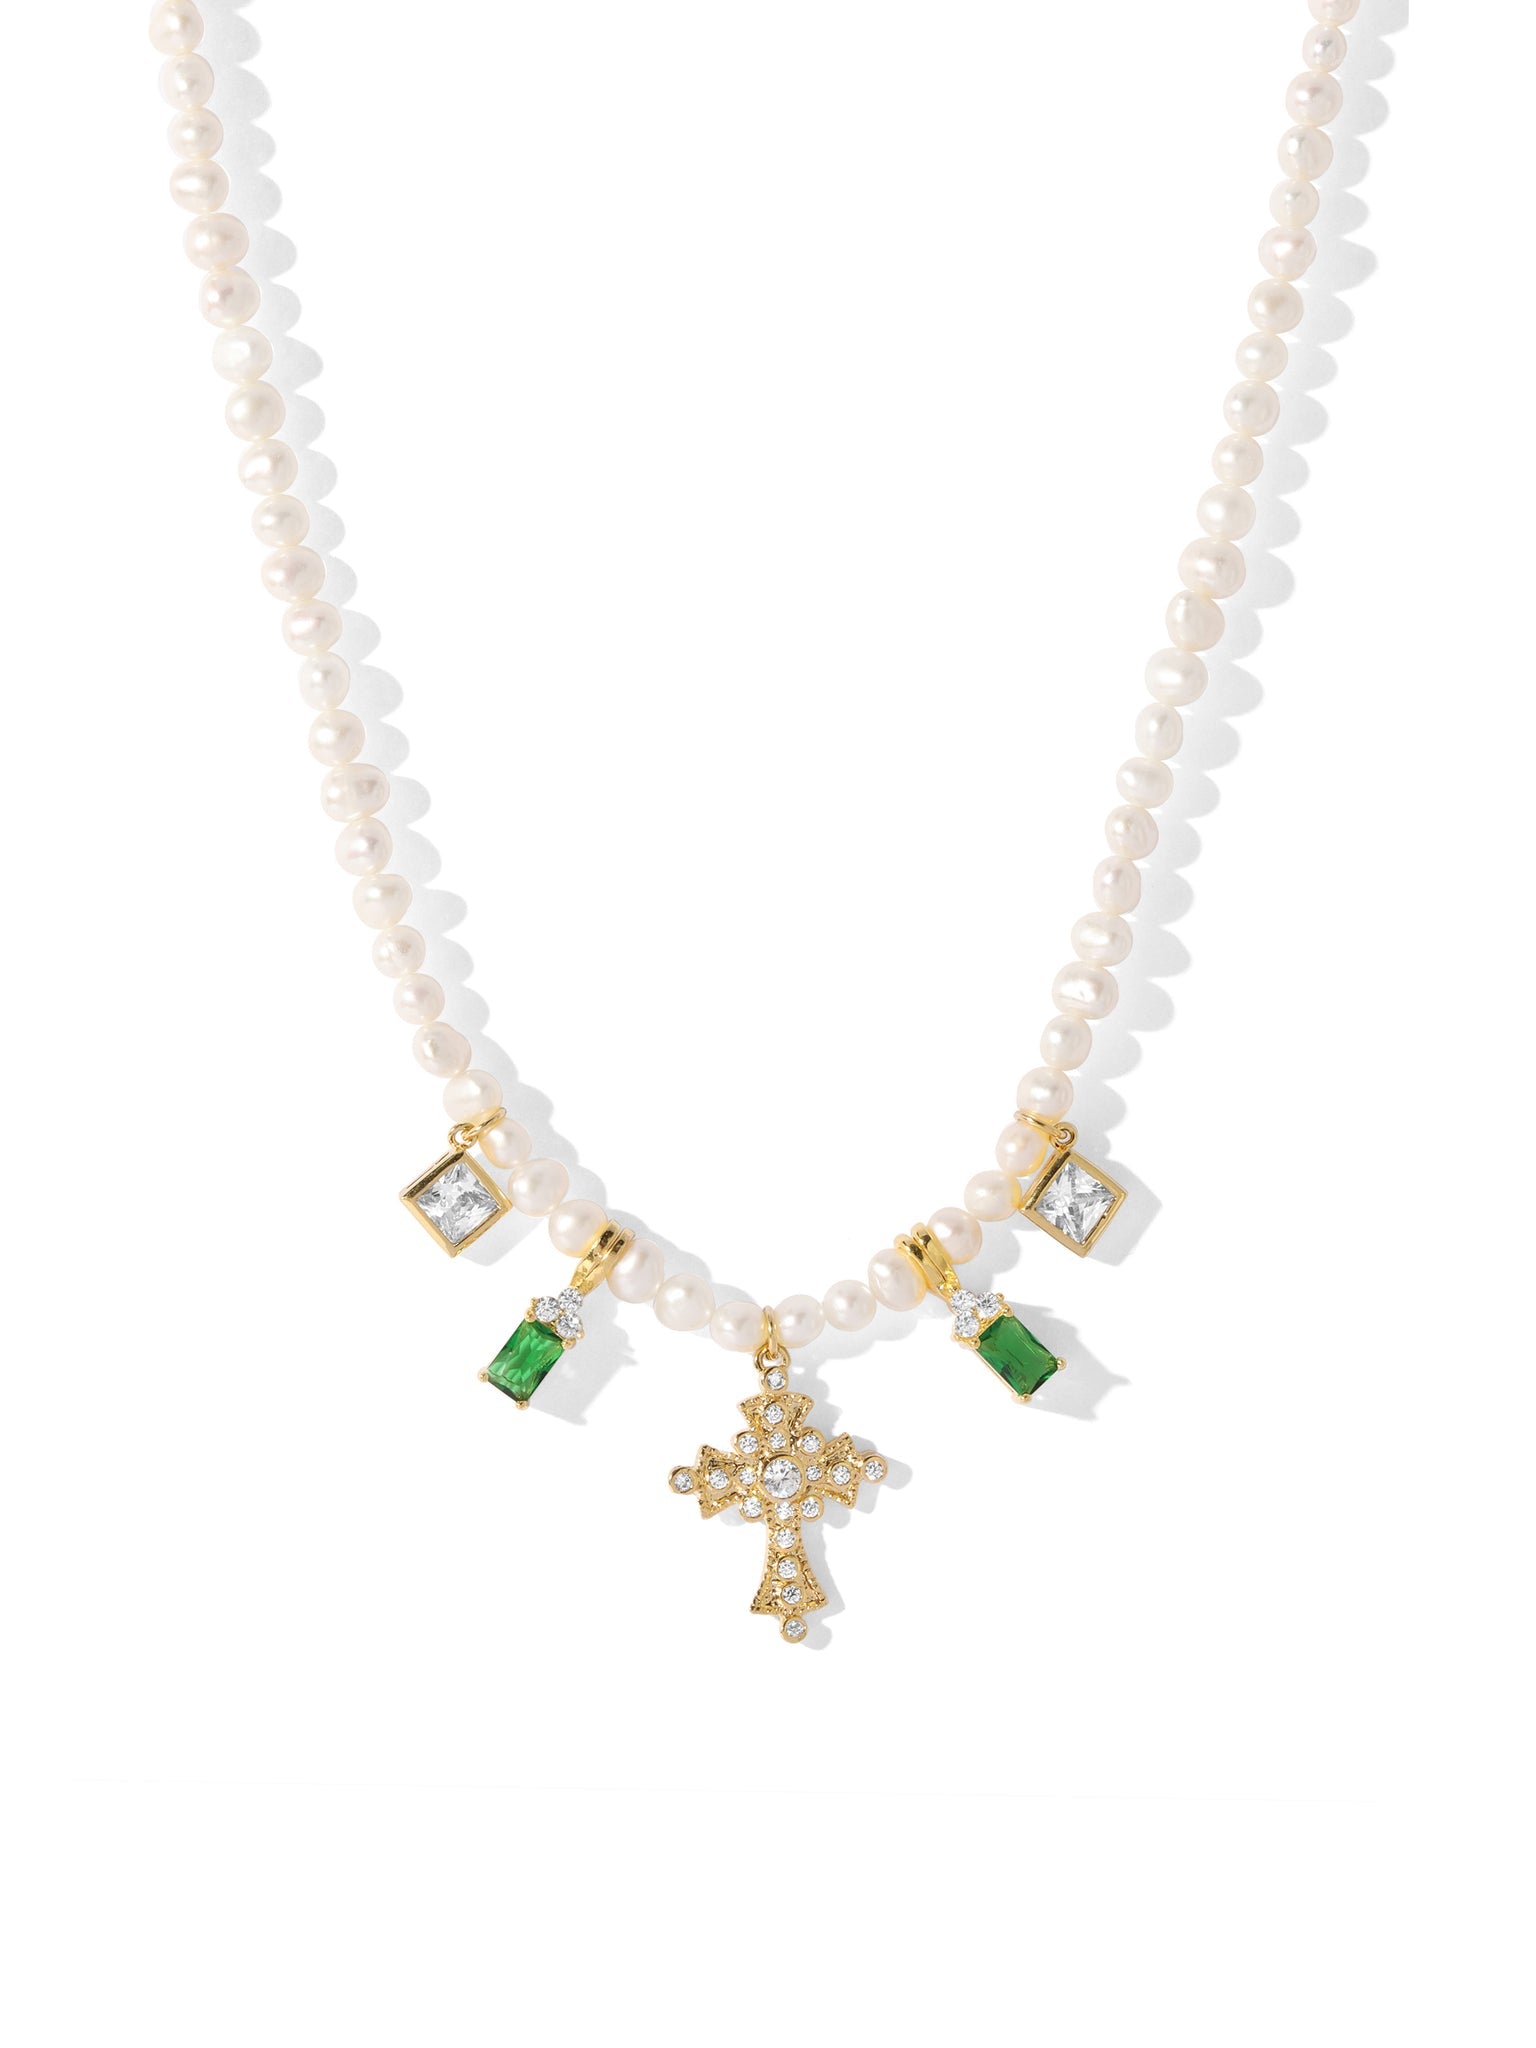 The Calloway Cross Necklace